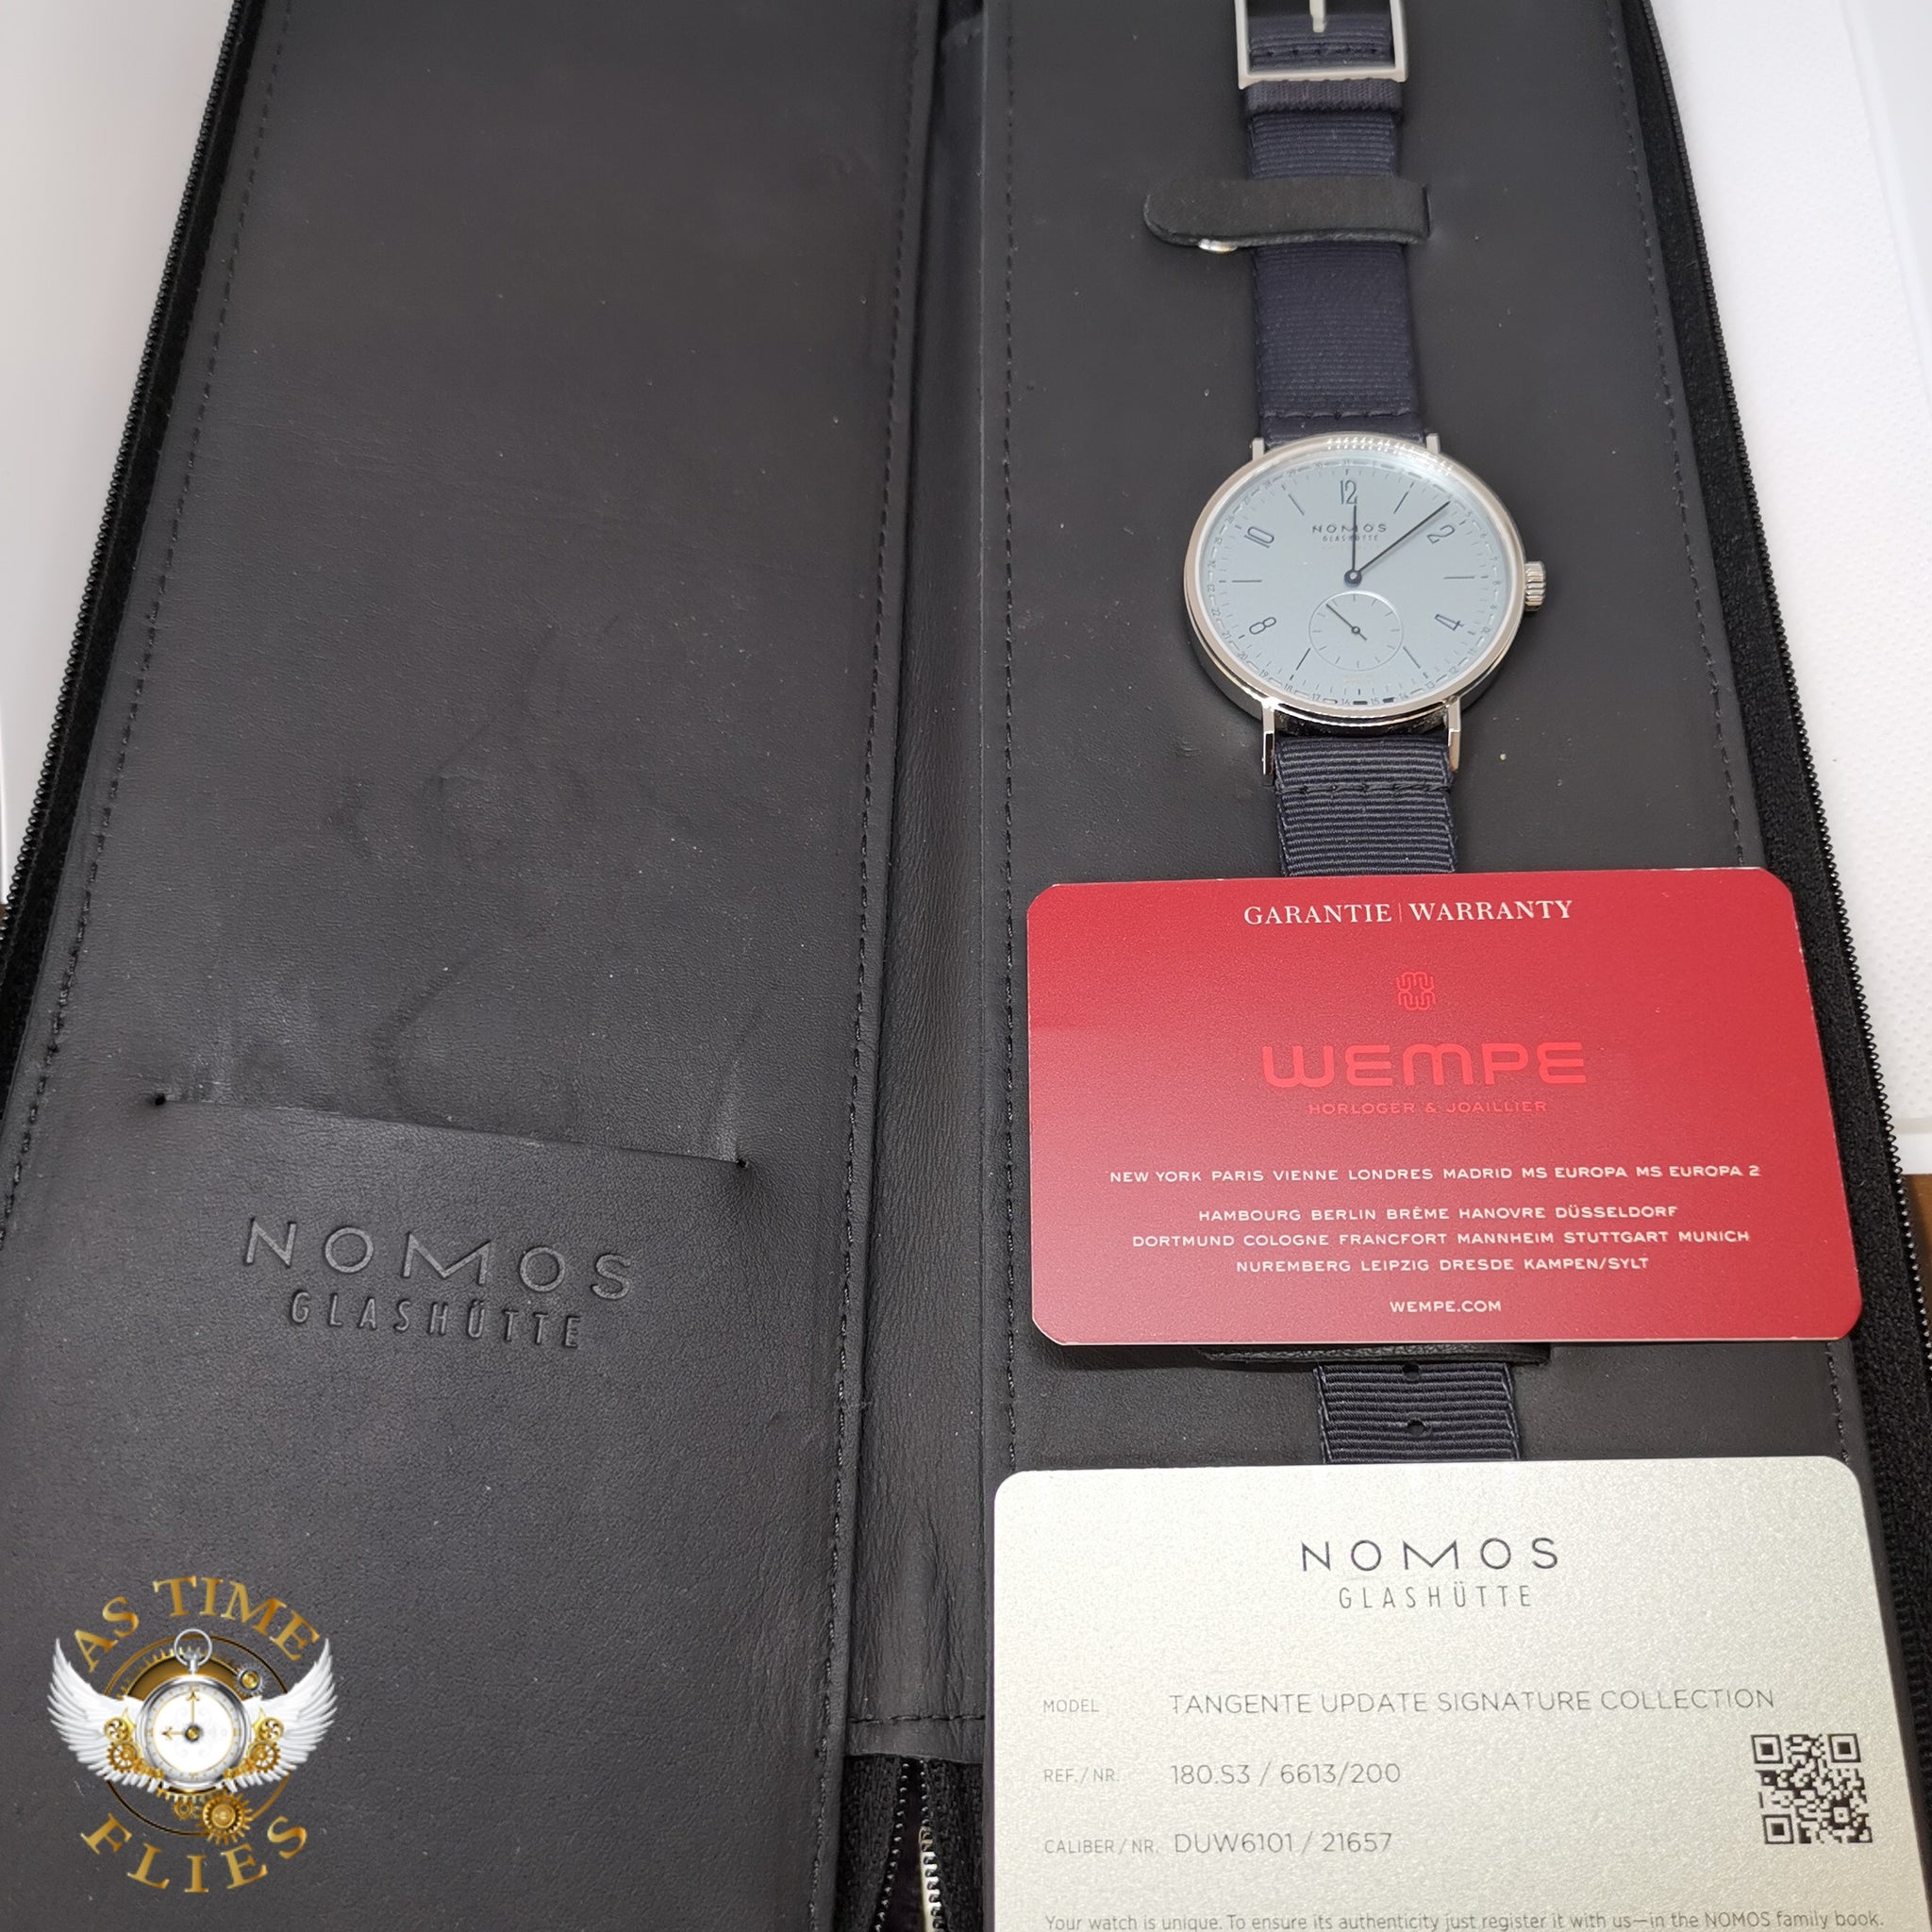 Nomos Glashutte Tagente "Wempe" 180.S3 / 6613/200 1 of 200 Limited Edition